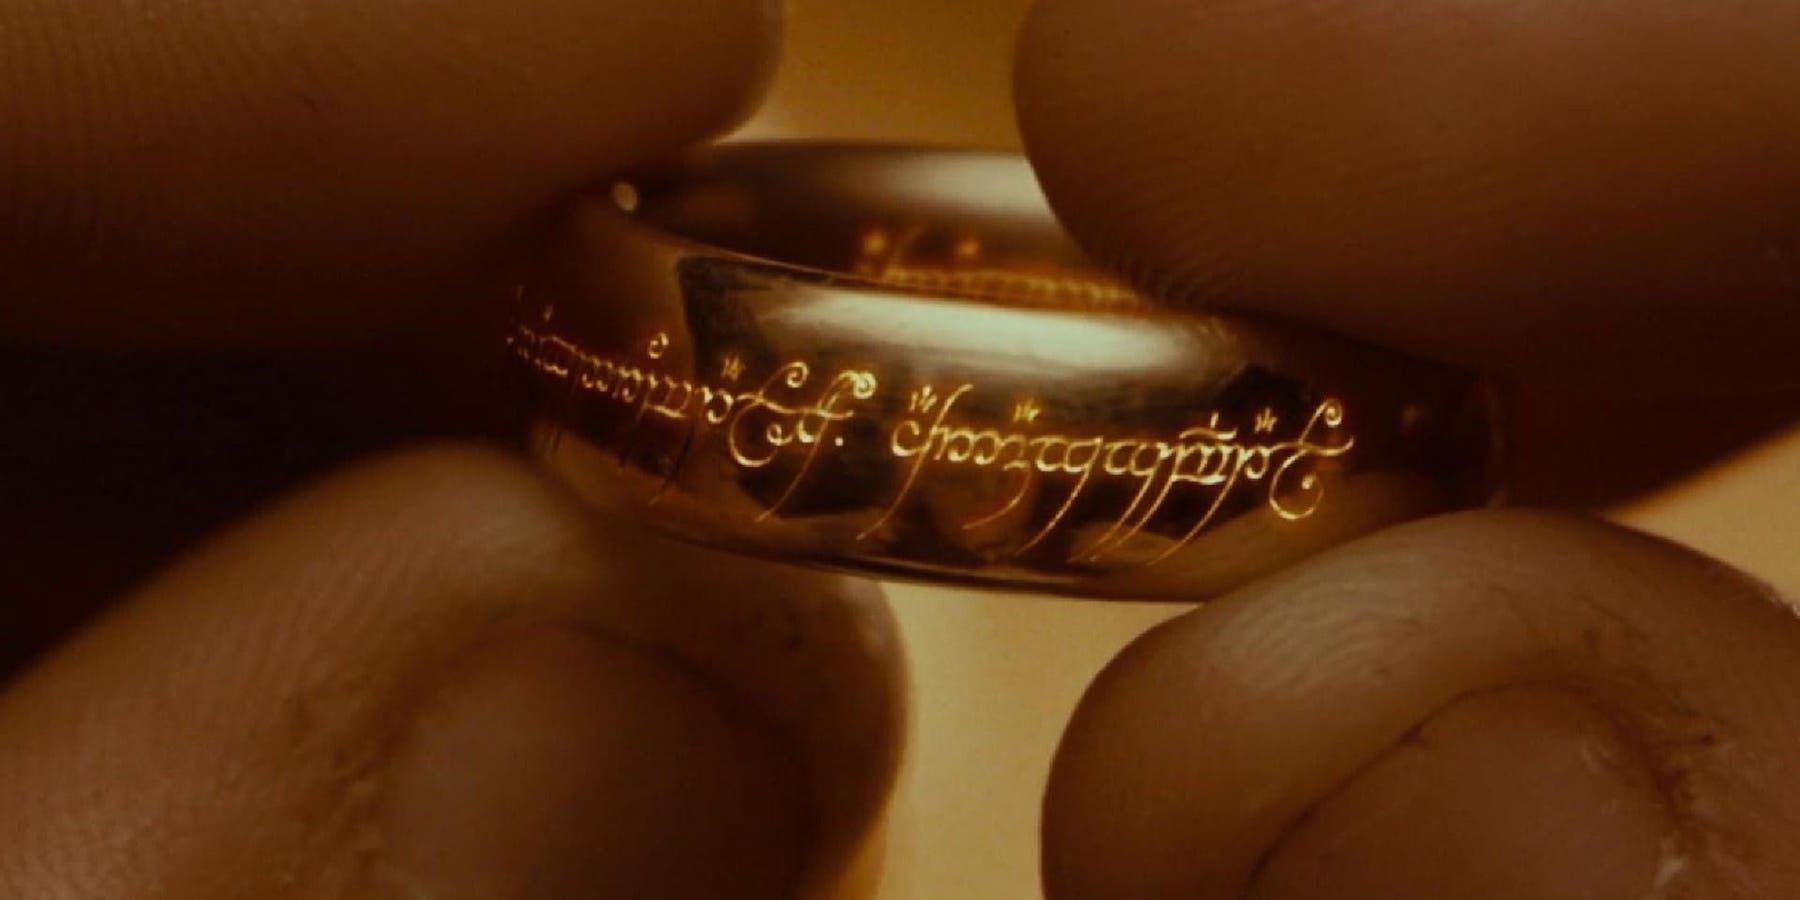 New Lord of the Rings Movies Announced From Original Trilogy